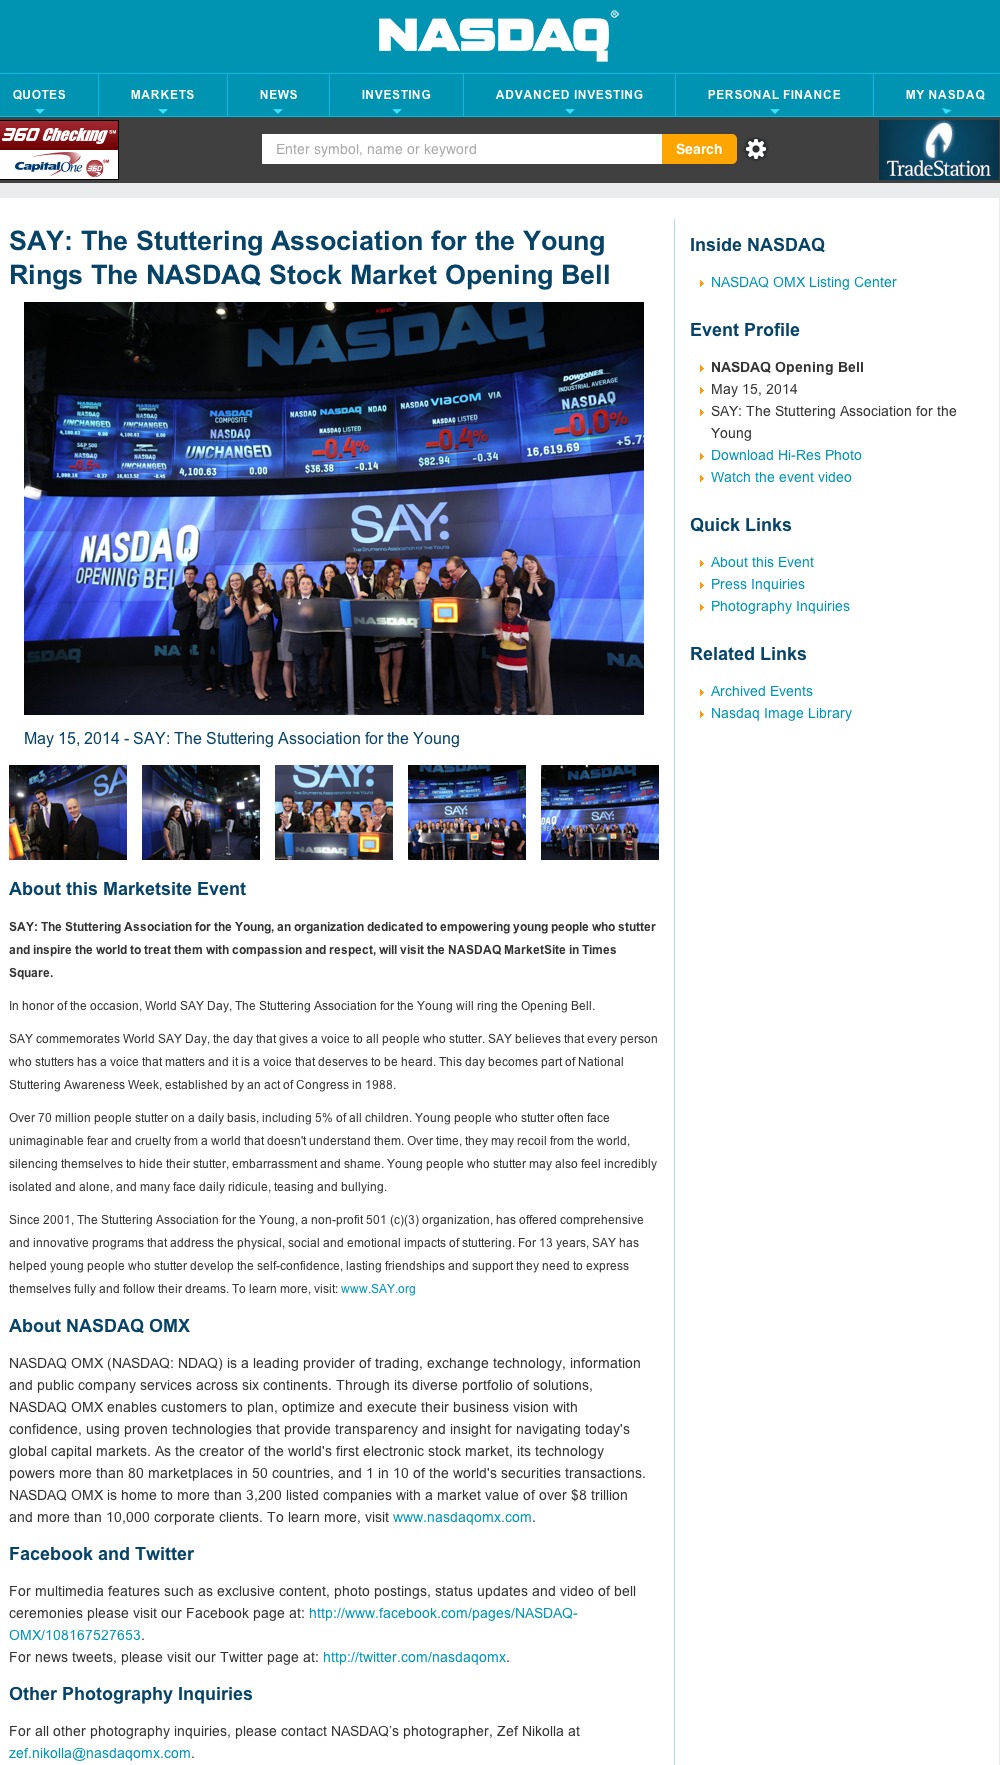 The Stuttering Association for the Young Rings the NASDAQ Stock Market Opening Bell